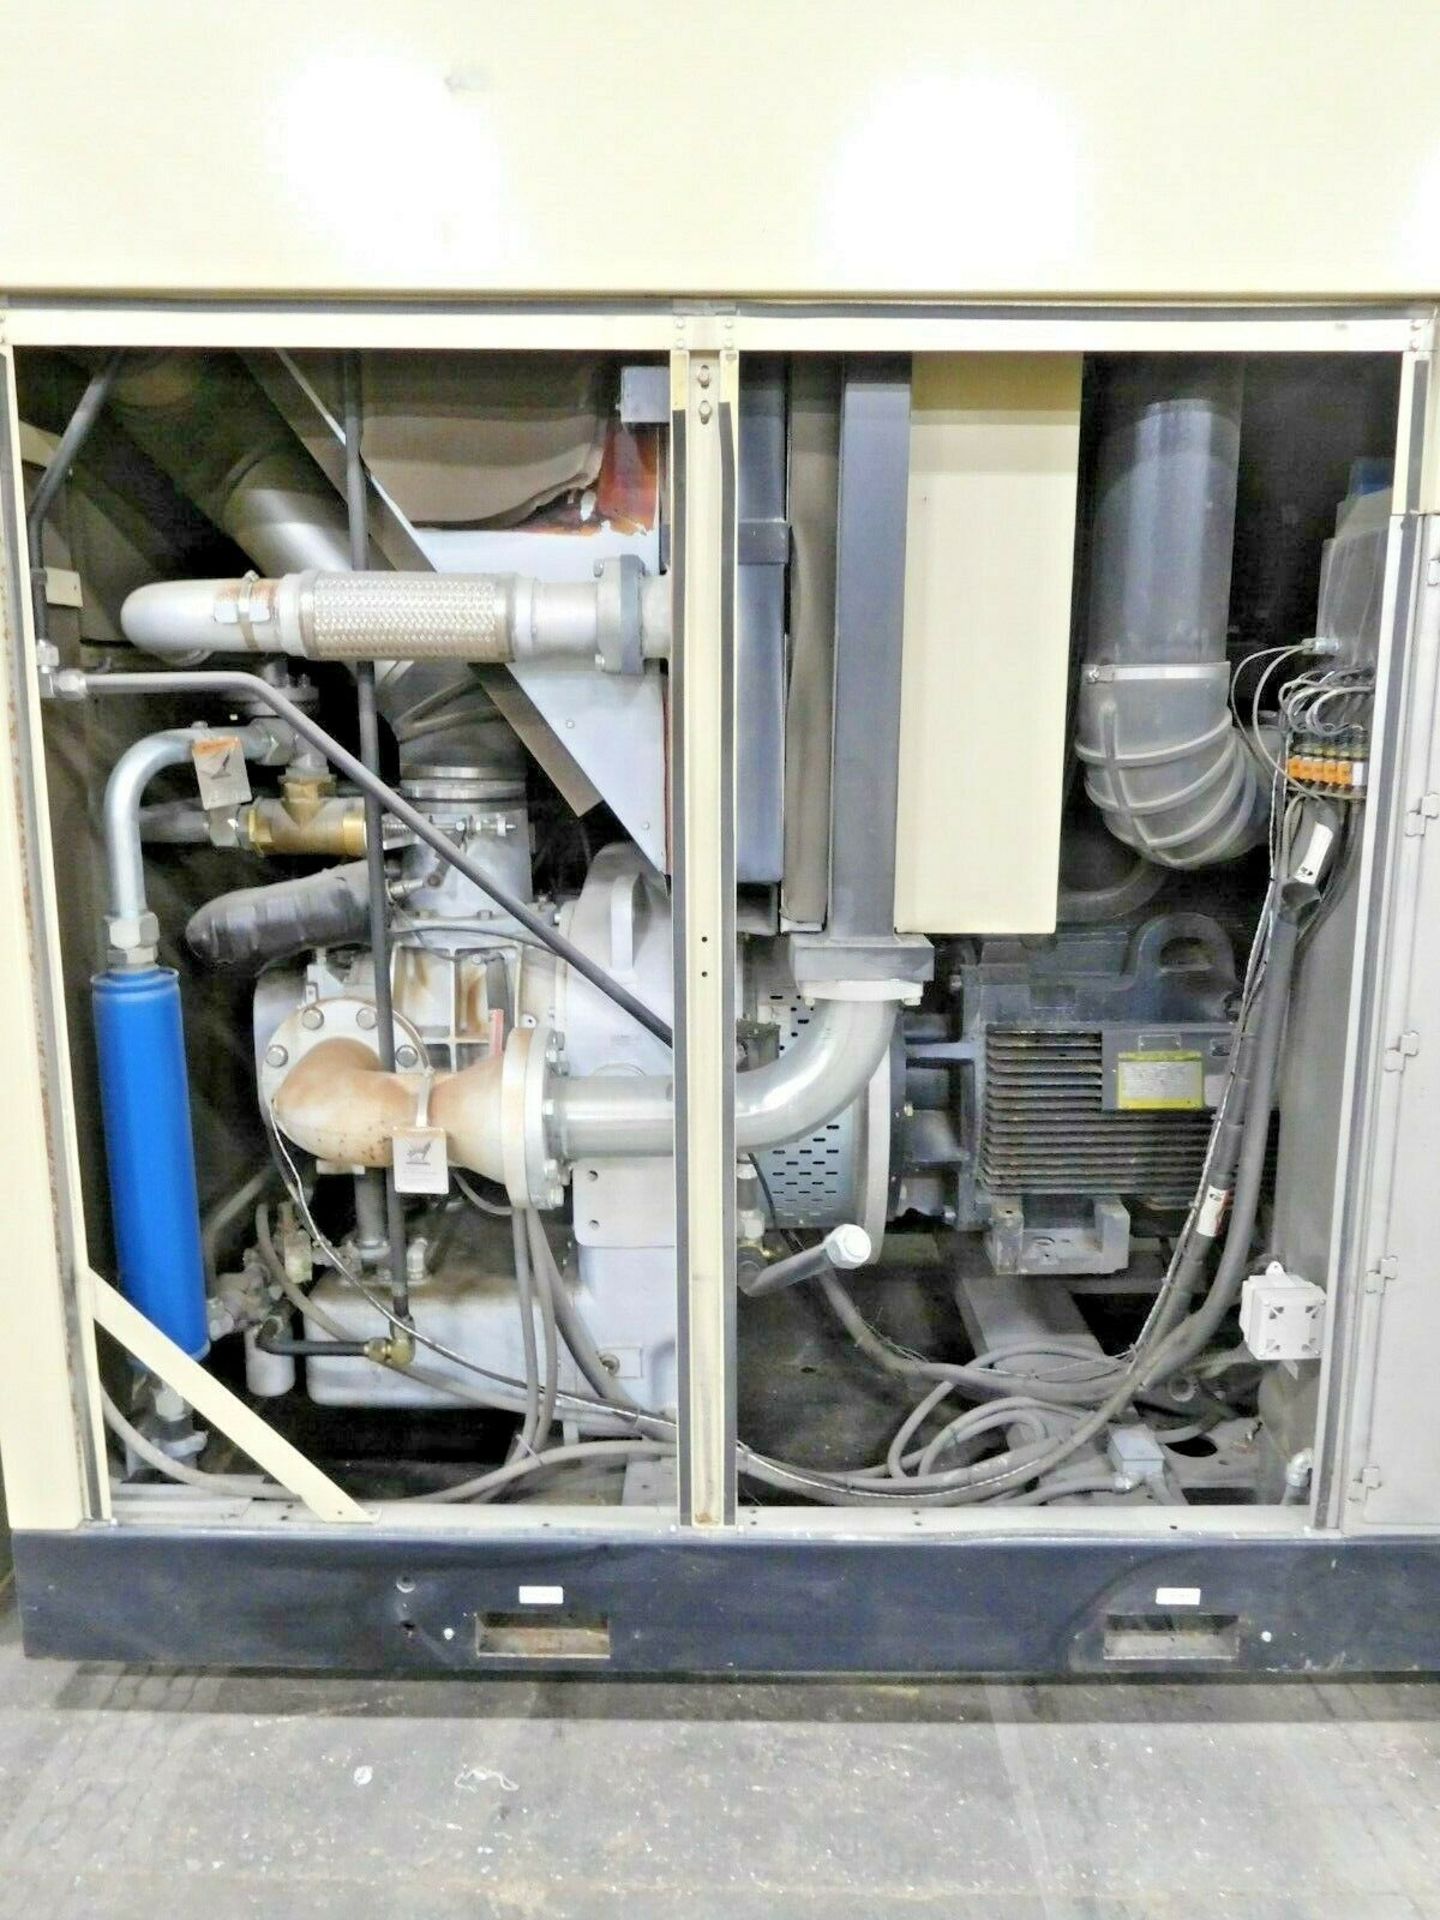 Ingersoll Rand H300 Rotary Screw Air Compressor. 1264 ACFM. 350 HP. - Image 4 of 7